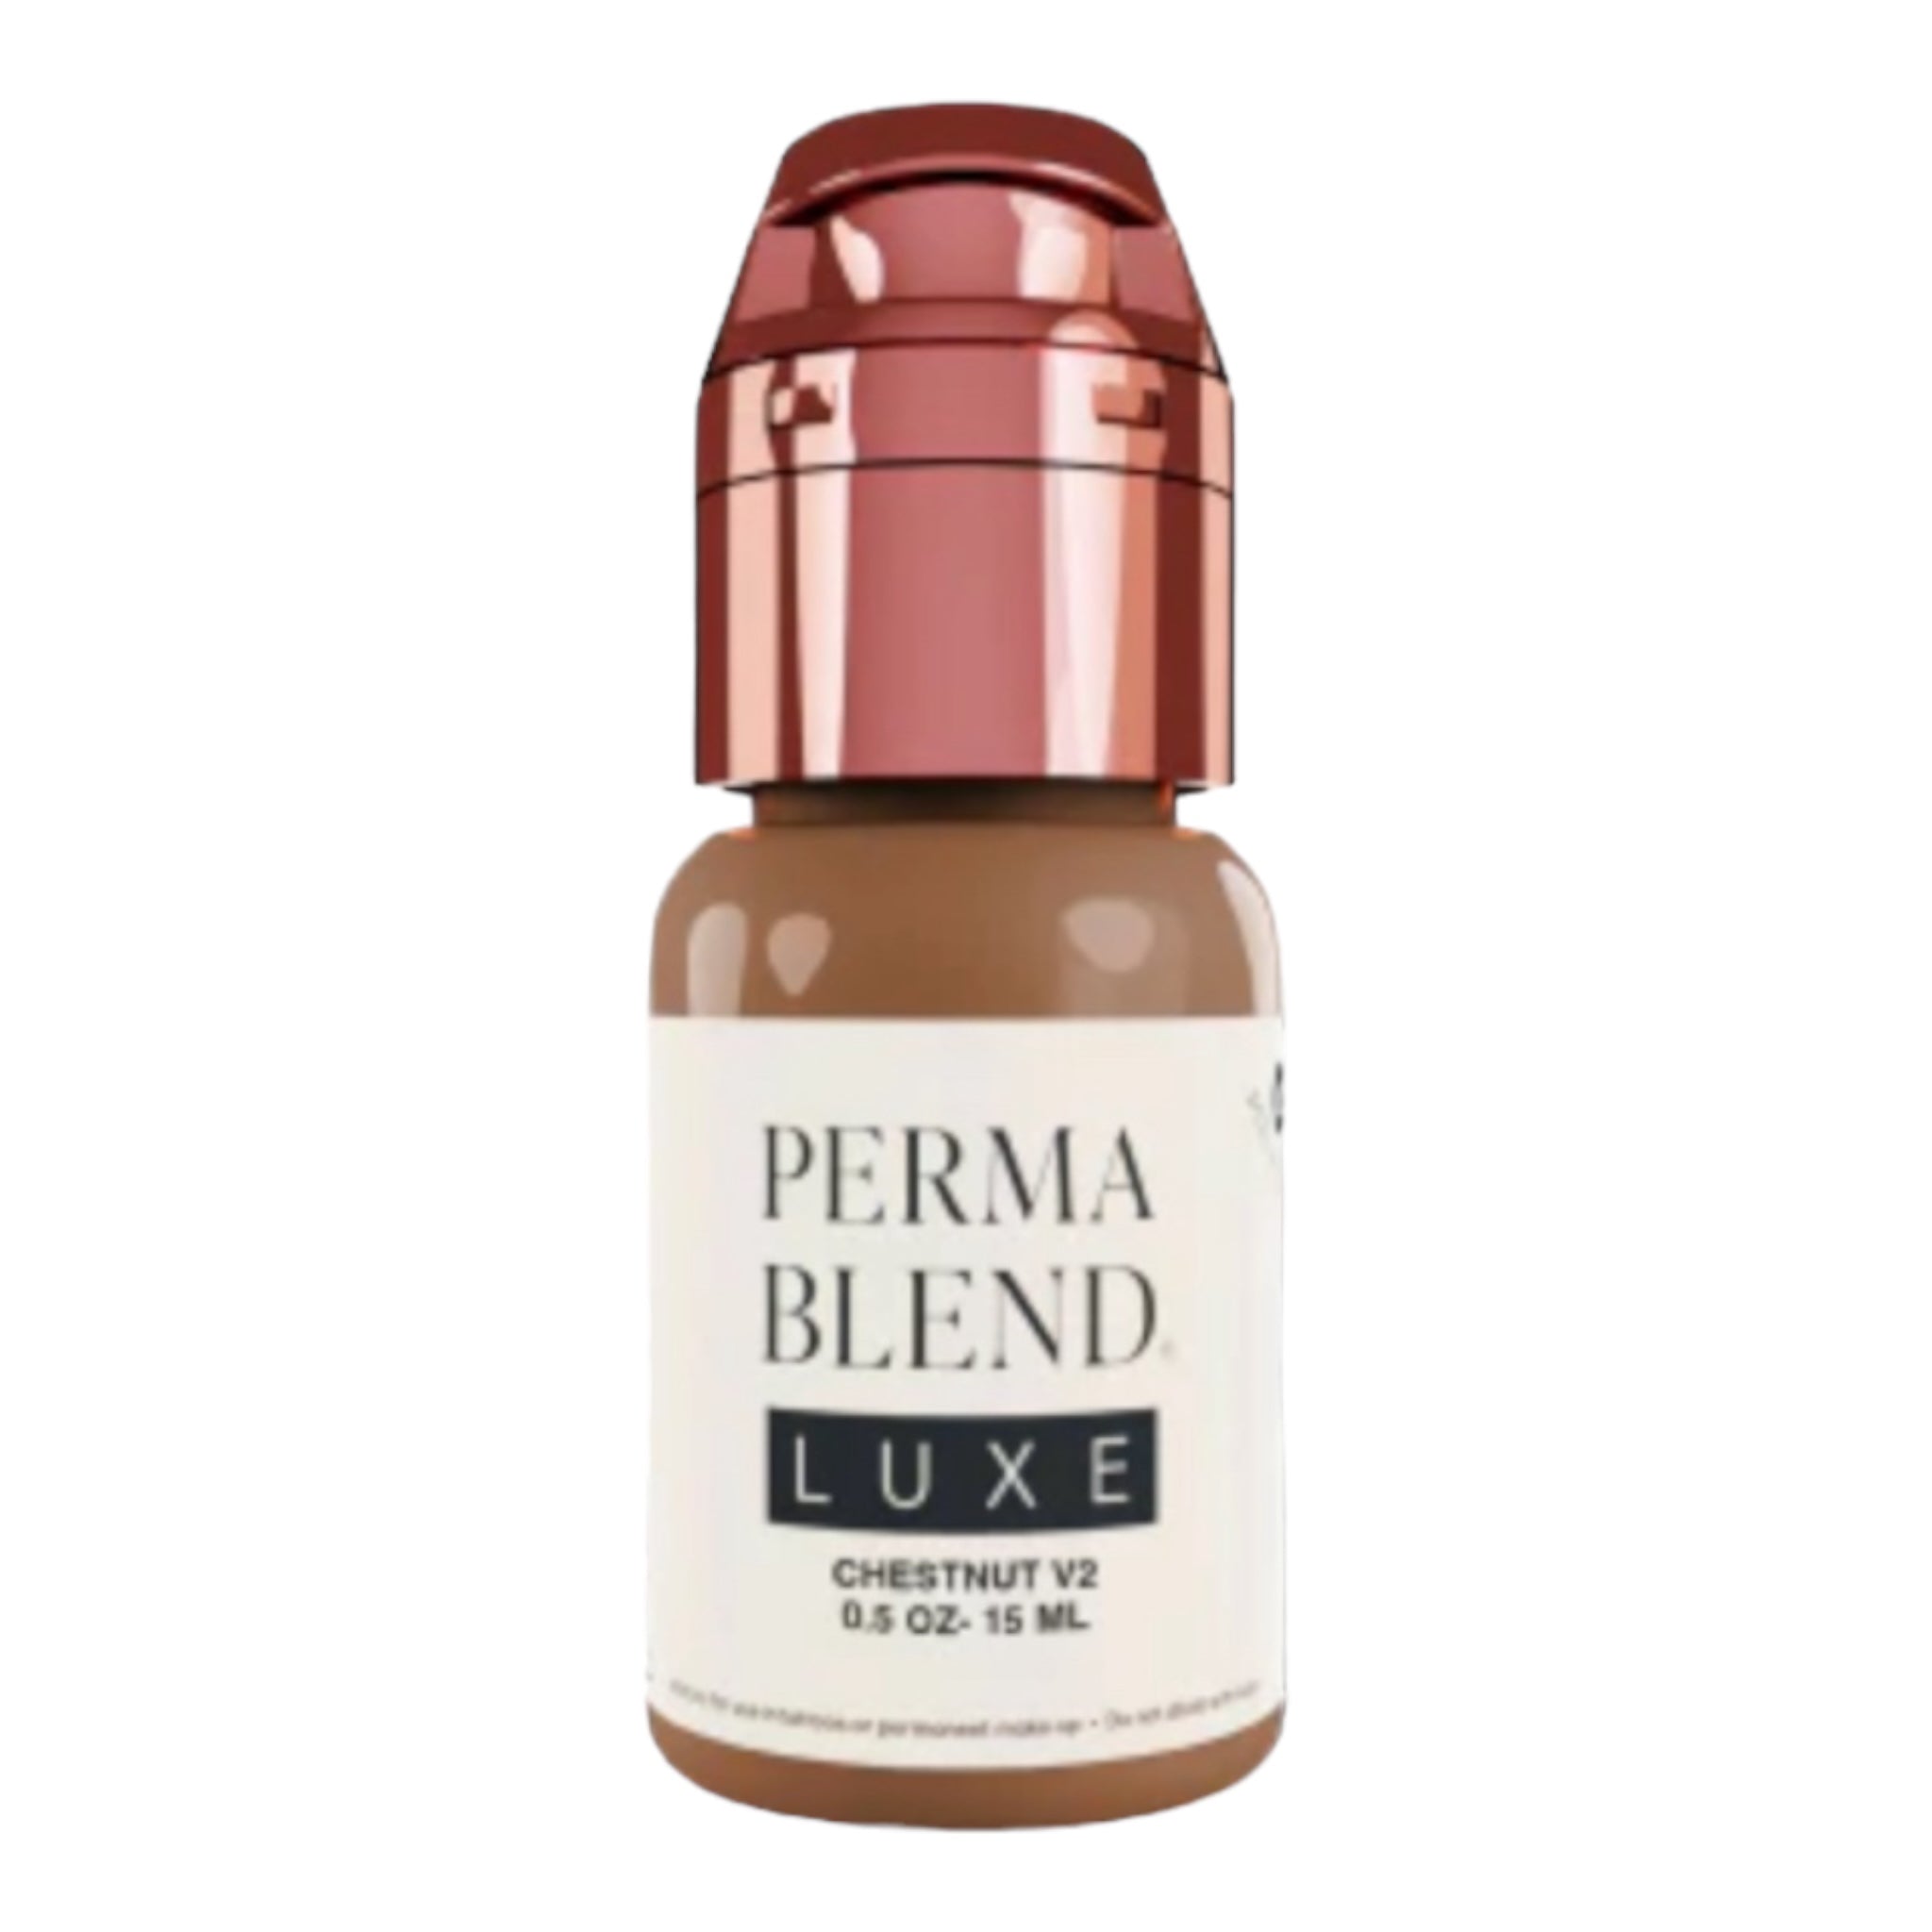 Encre Maquillage Perma Blend Luxe 15ml - Chestnut V2